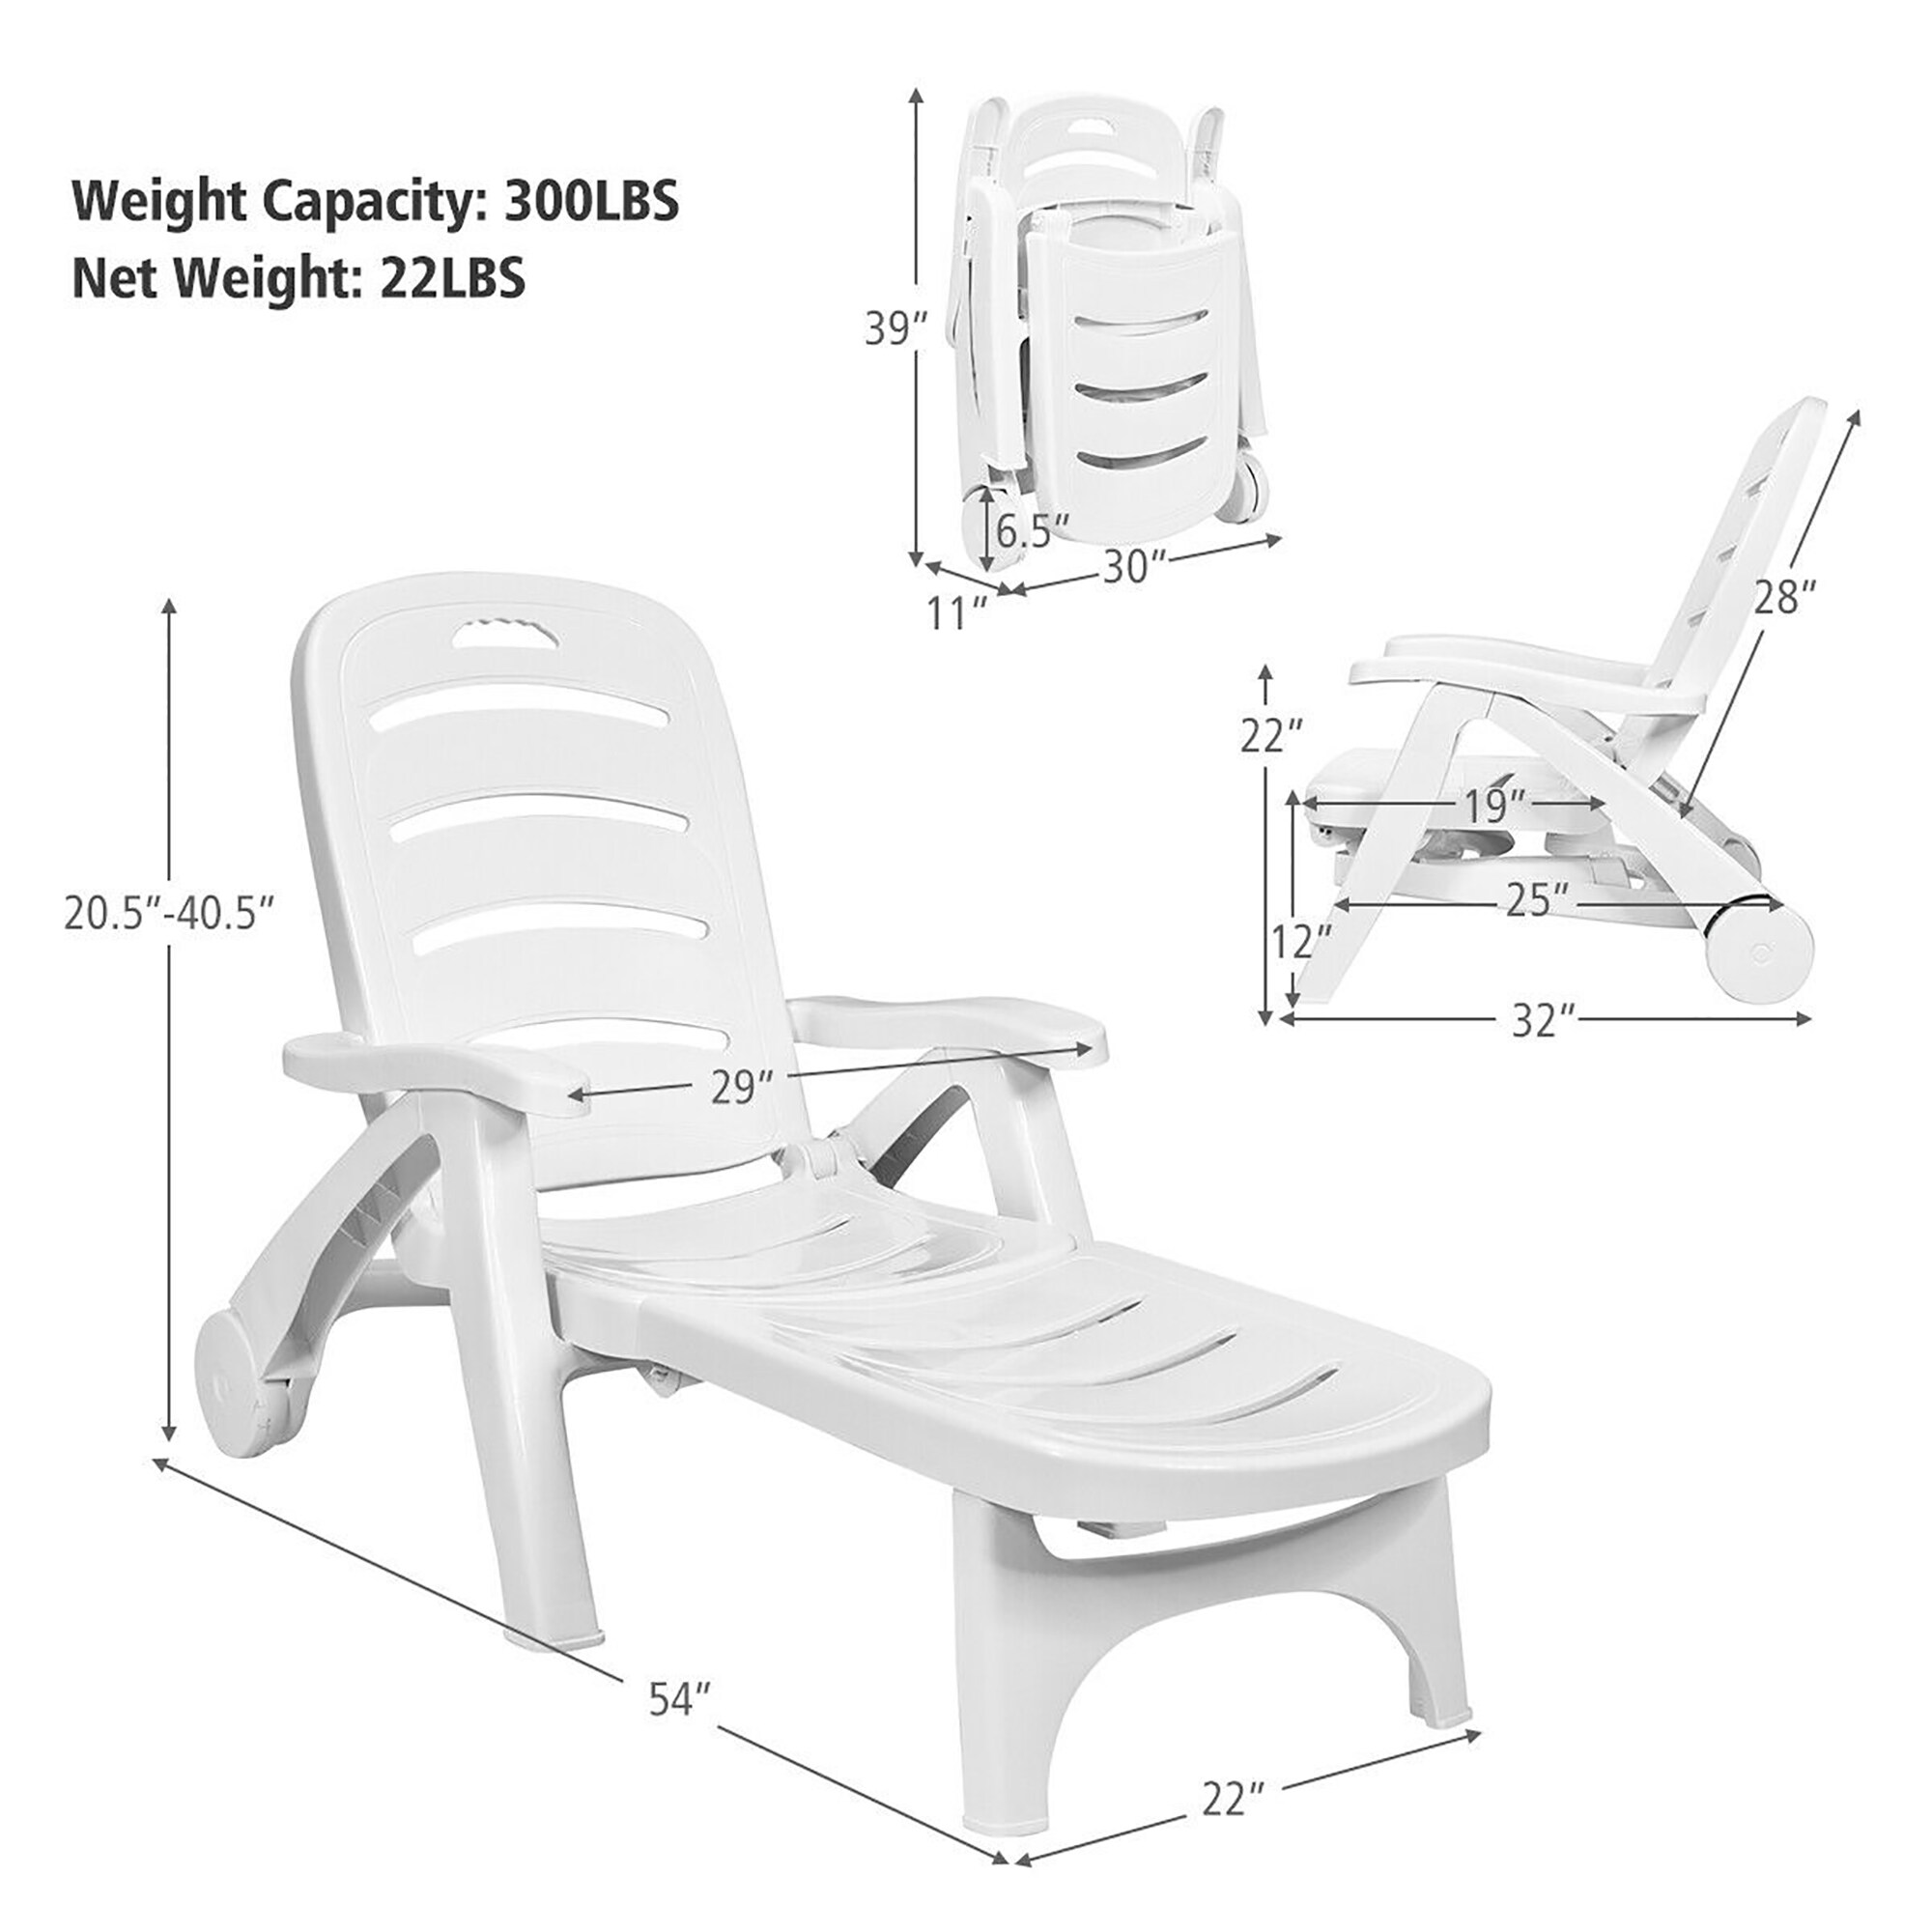 YERT Outdoor Adjustable Backrests Lounge Chair,Recliner W/Armrests,for Patio Garden Foldable Beach Sunbathing Lounger 1, White Poolside 